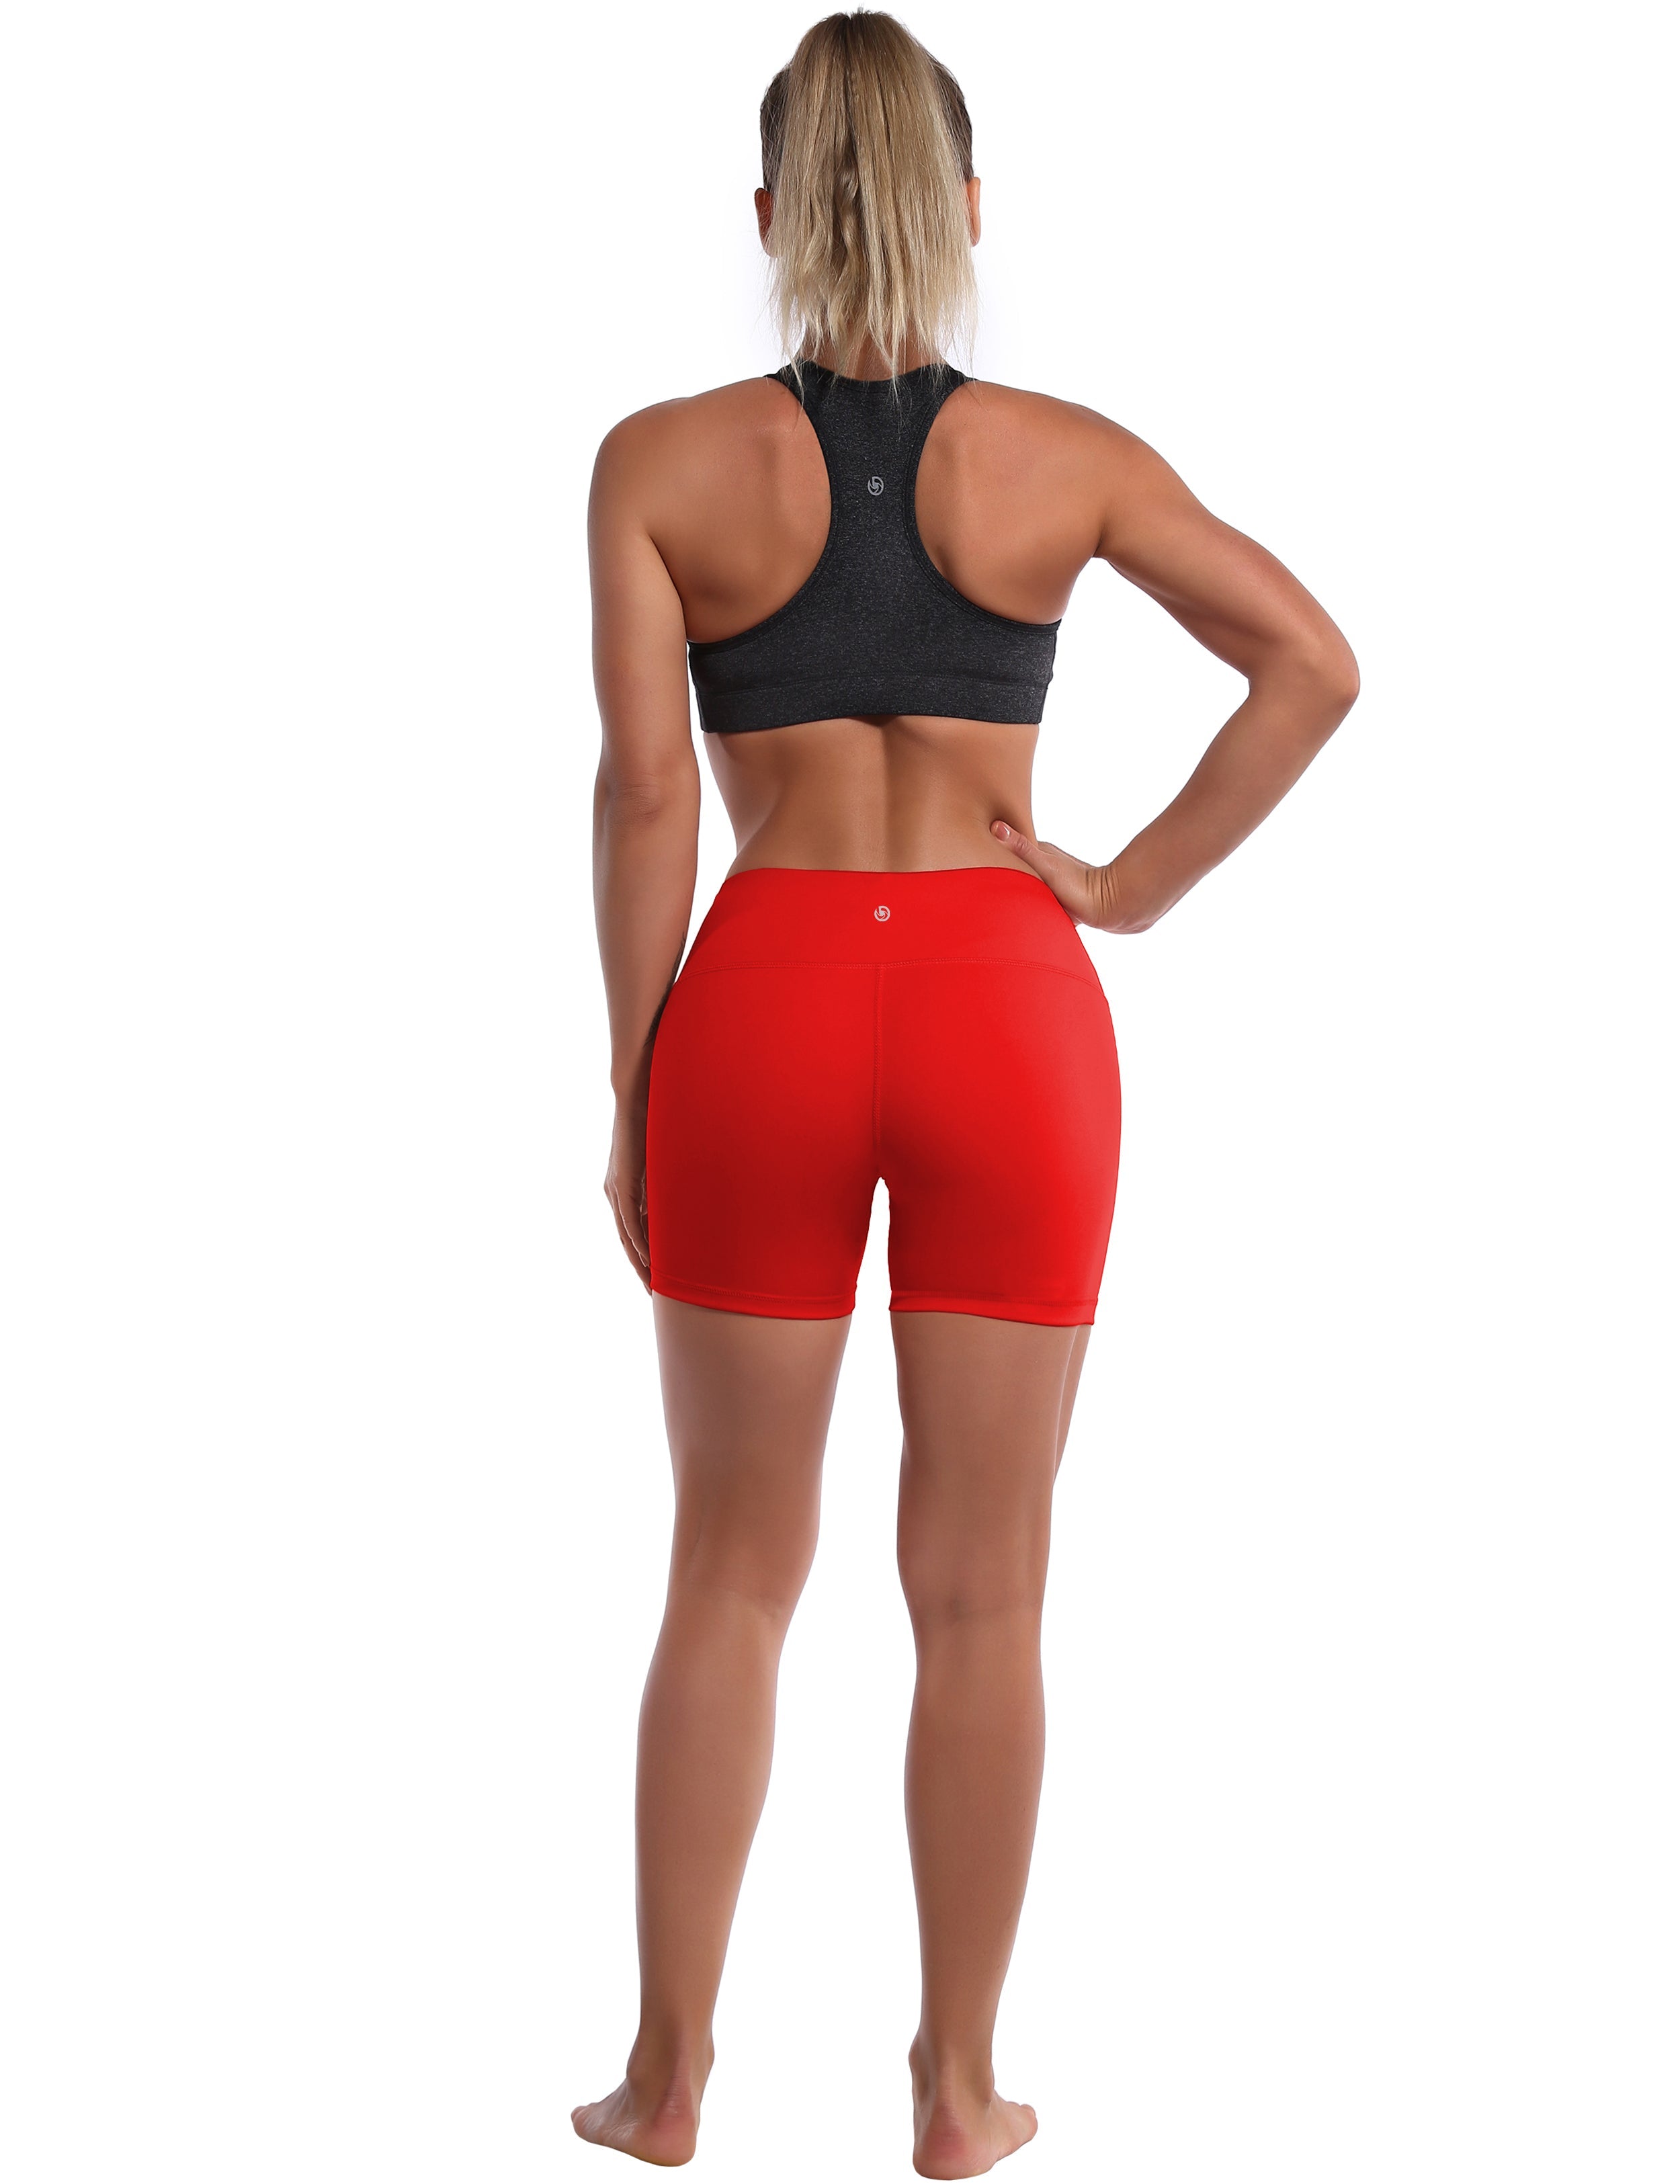 4" Pilates Shorts scarlet Sleek, soft, smooth and totally comfortable: our newest style is here. Softest-ever fabric High elasticity High density 4-way stretch Fabric doesn't attract lint easily No see-through Moisture-wicking Machine wash 75% Nylon, 25% Spandex